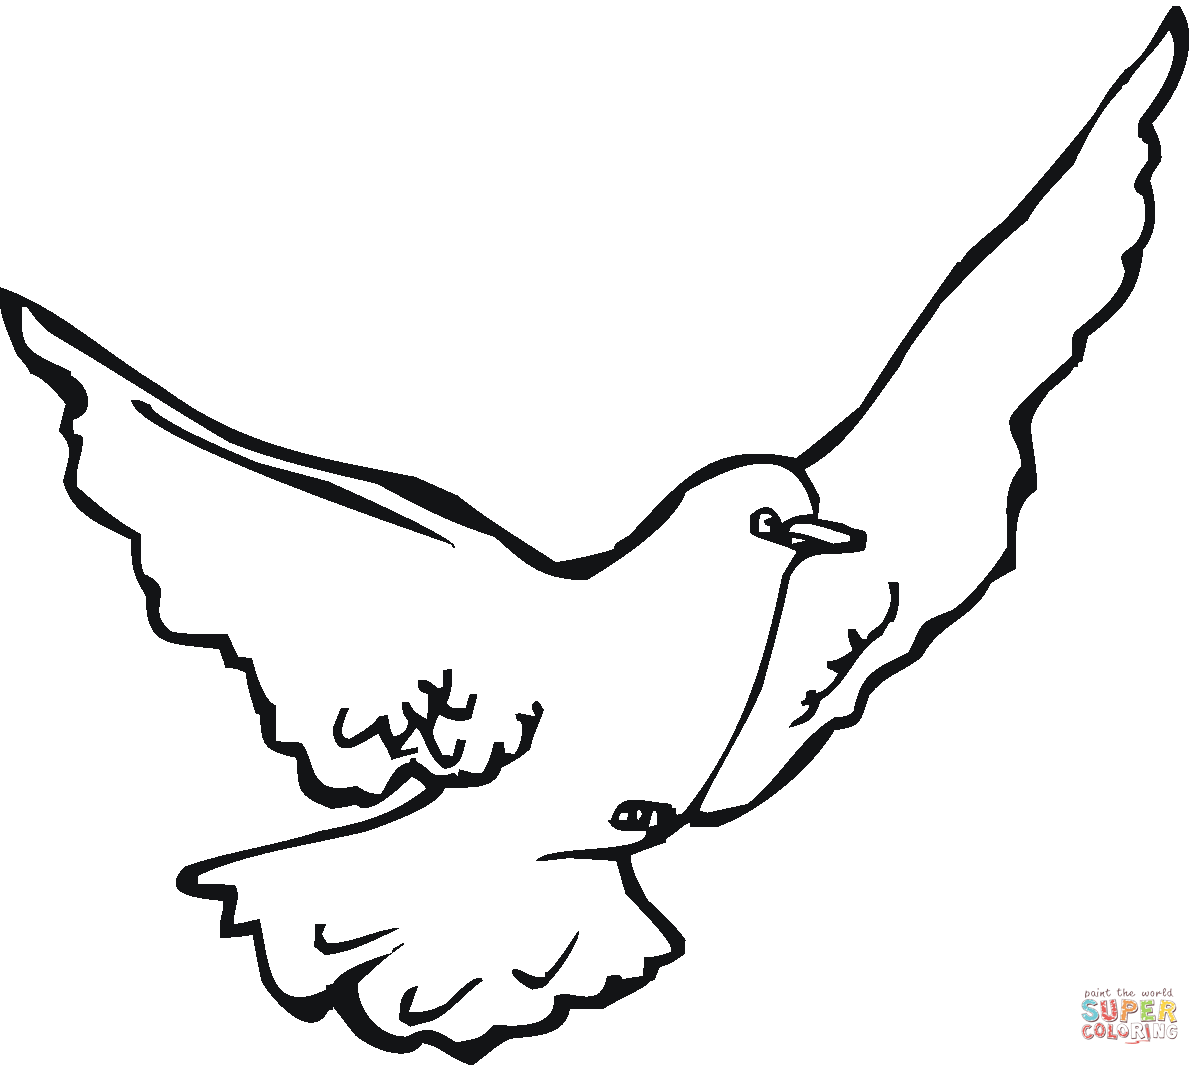 Doves coloring pages | Free Coloring Pages